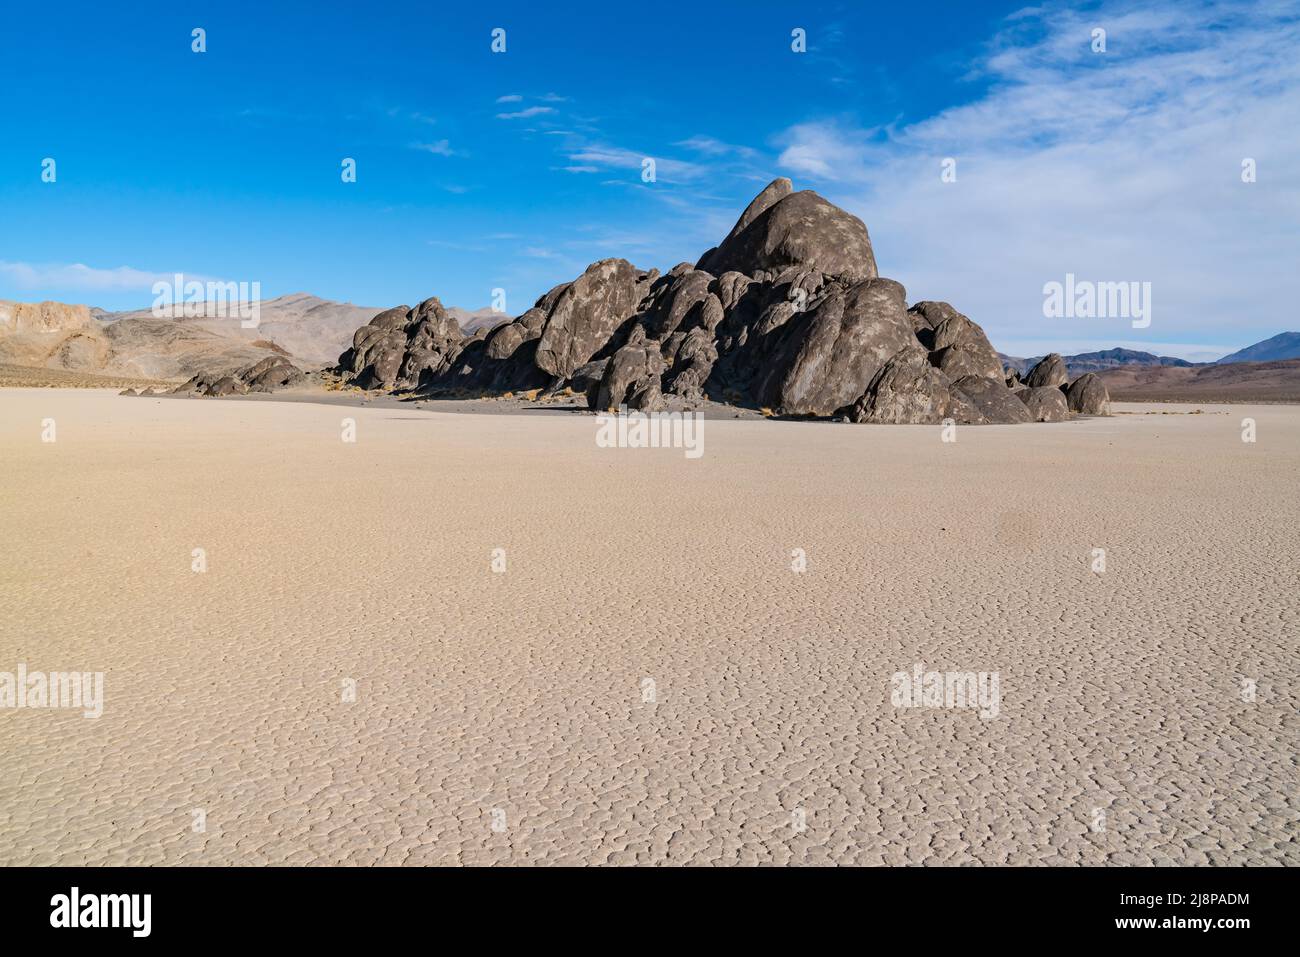 Rock island on the dry lake bed of the Racetrack Playa in Death Valley National Park Stock Photo